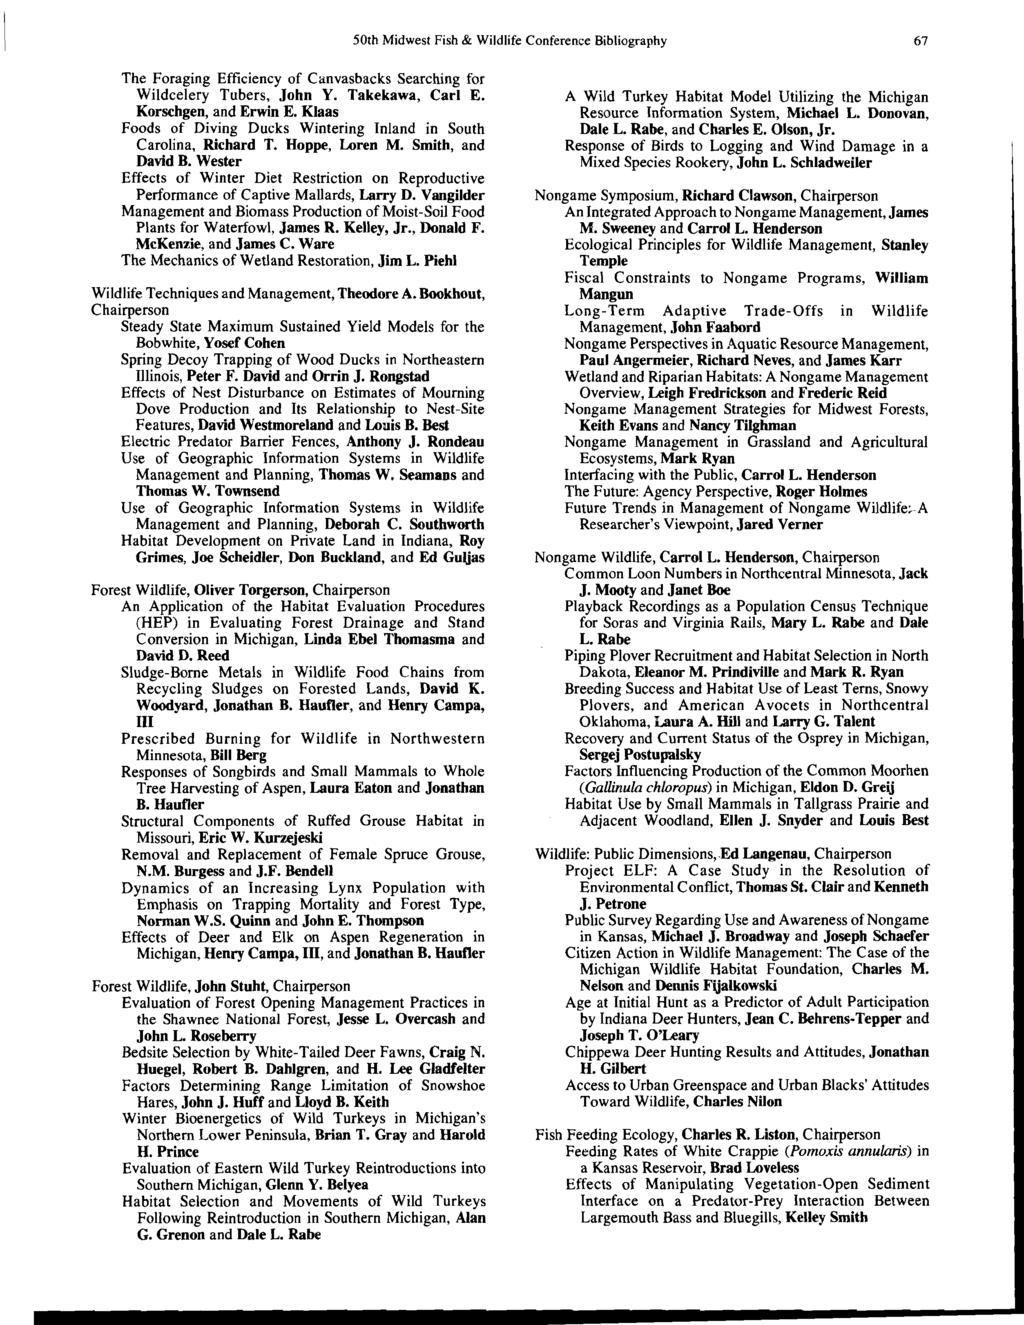 50th Midwest Fish & Wildlife Conference Bibliography 67 The Foraging Efficiency of Canvasbacks Searching for Wildcelery Tubers, John Y. Takekawa, Carl E. Korschgen, and Erwin E.